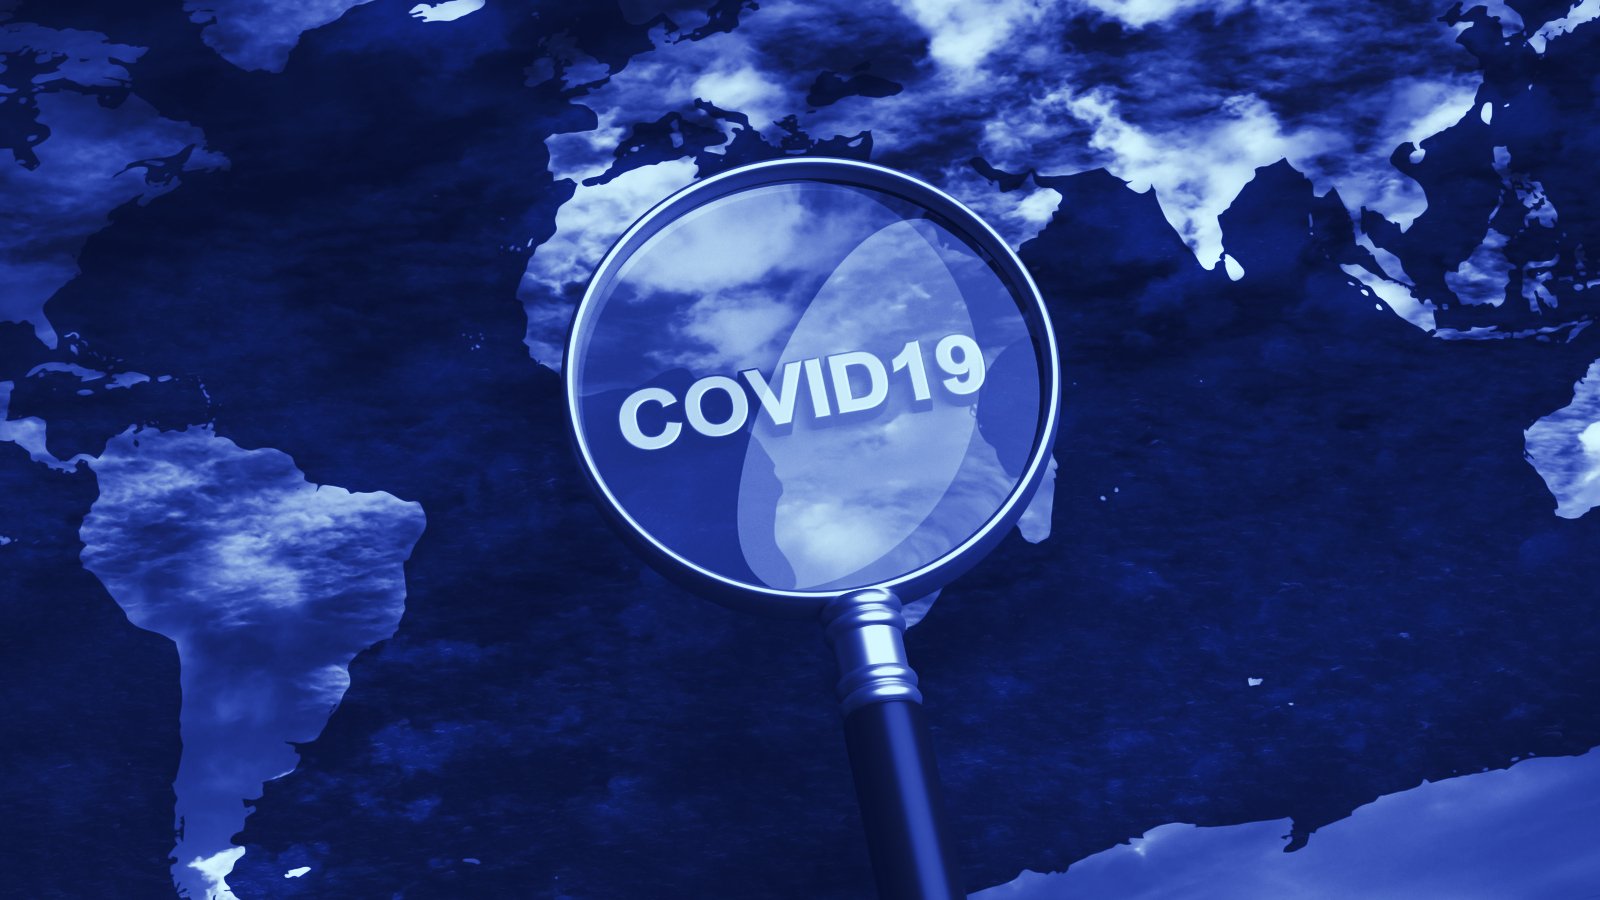 Covid-19 has caused a global lockdown. Image: Shutterstock